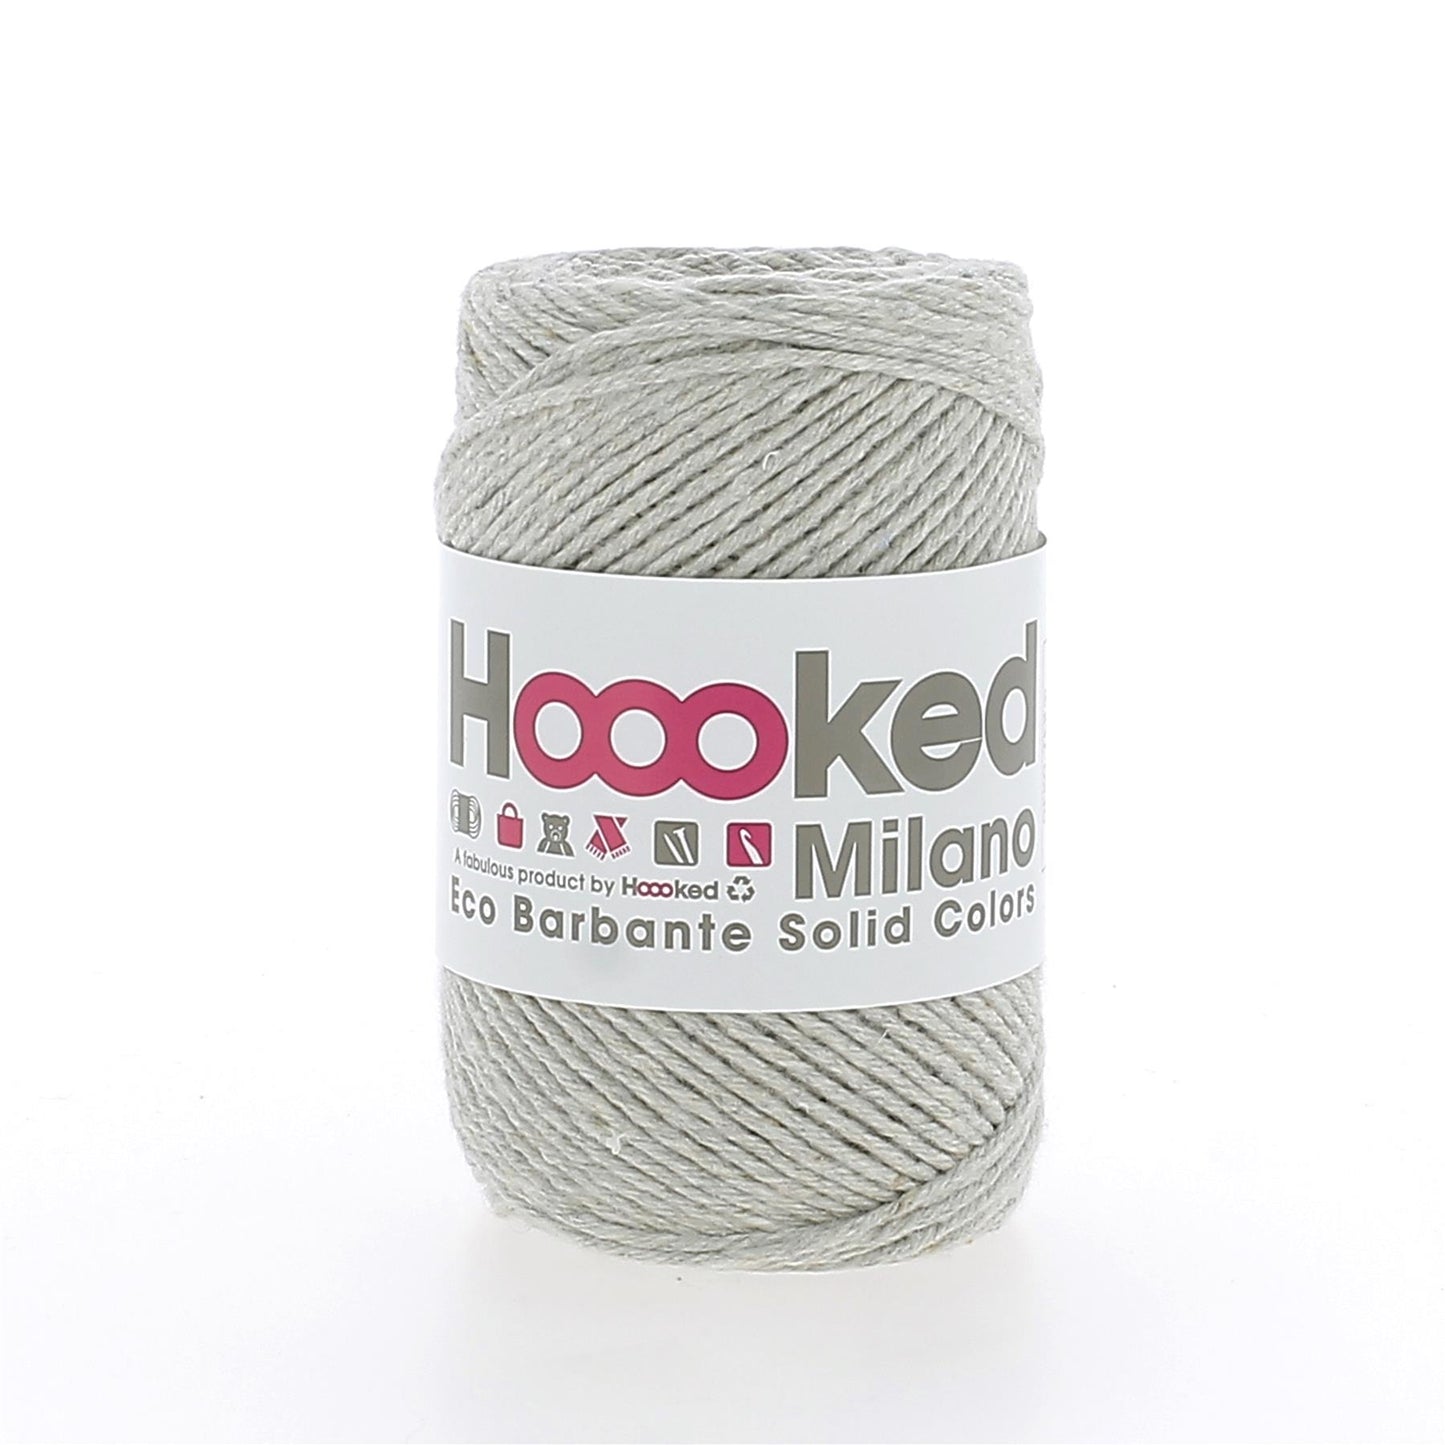 [Hoooked] D300 Eco Barbante Milano Biscuit Cotton Yarn - 102M, 100g